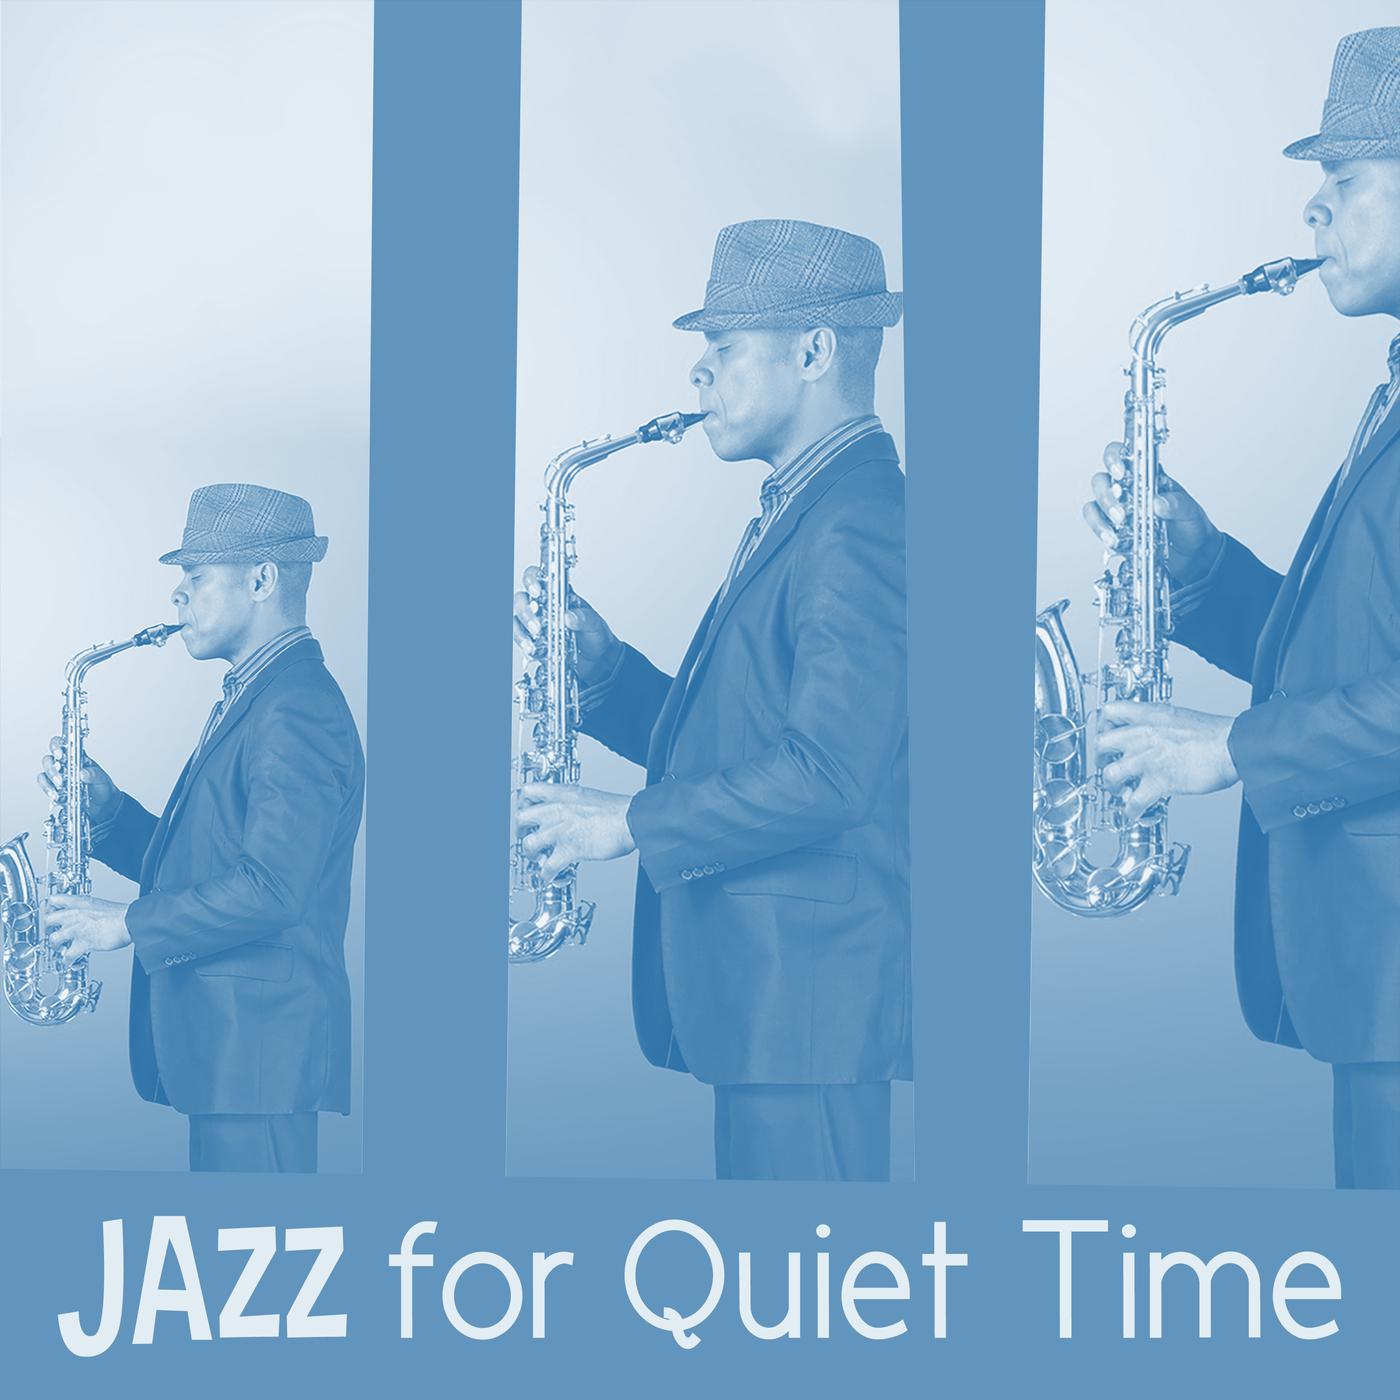 Jazz for Quiet Time